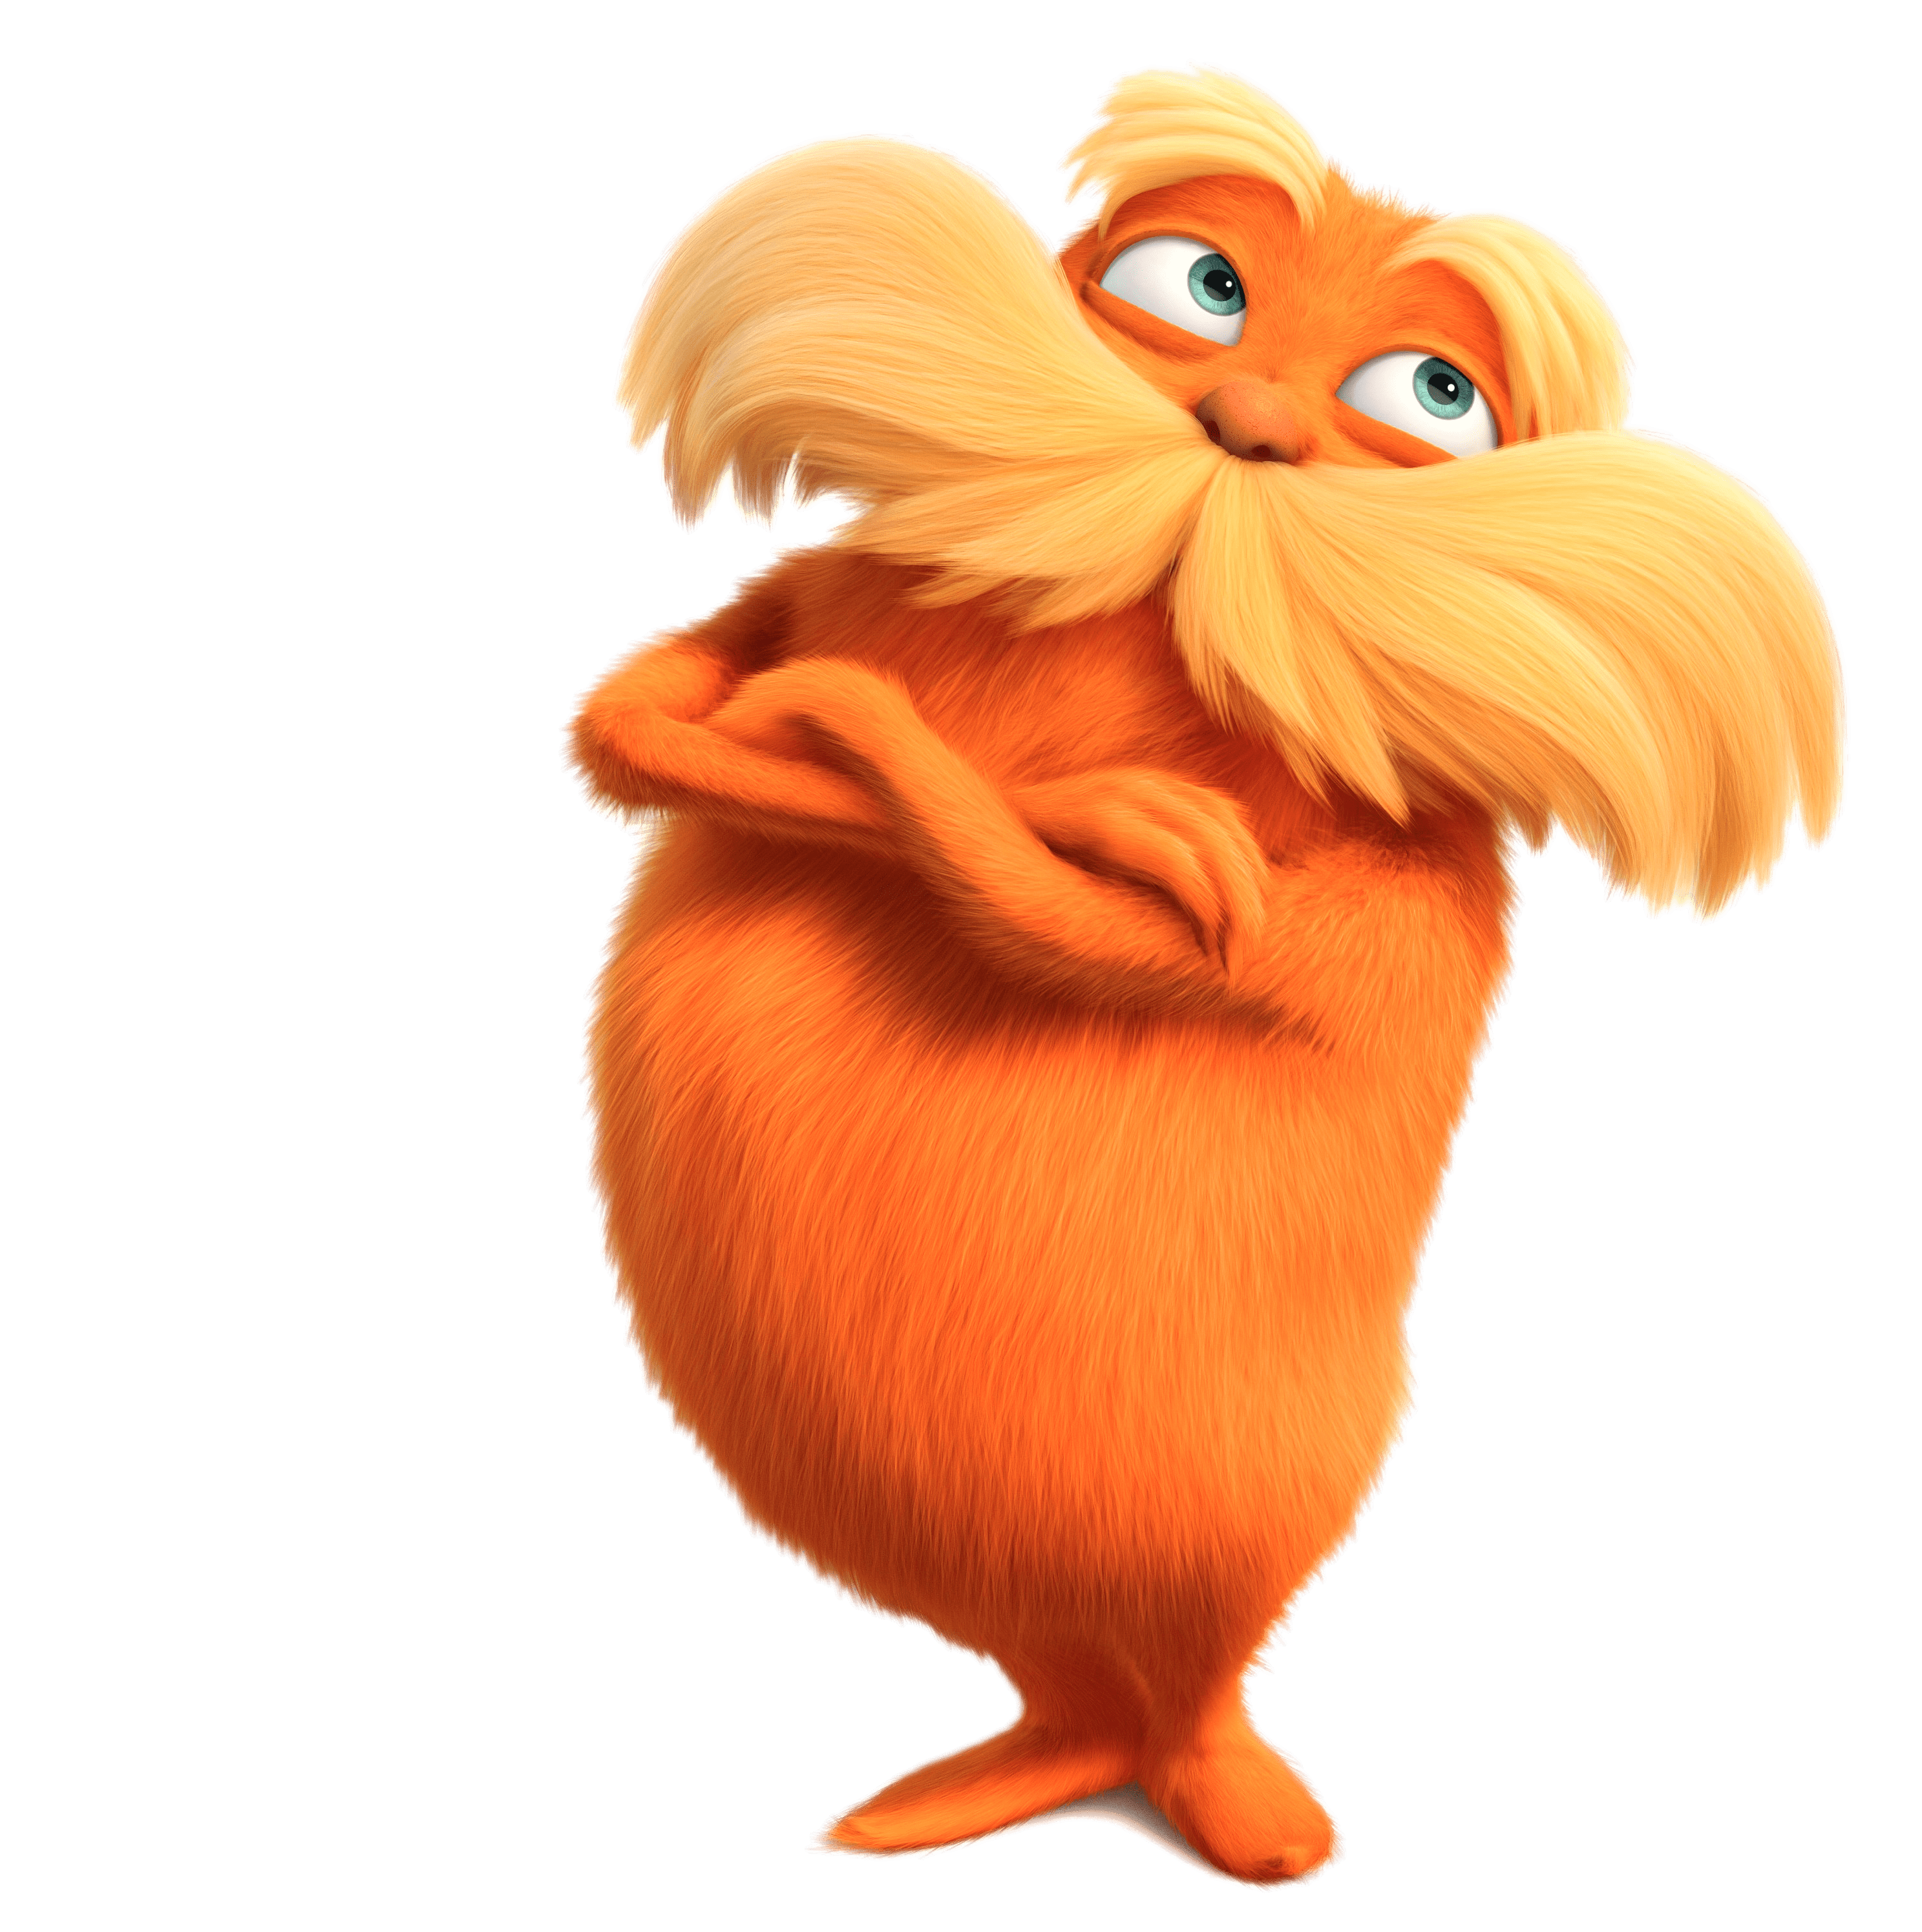 The lorax transparent png. Young clipart thinking